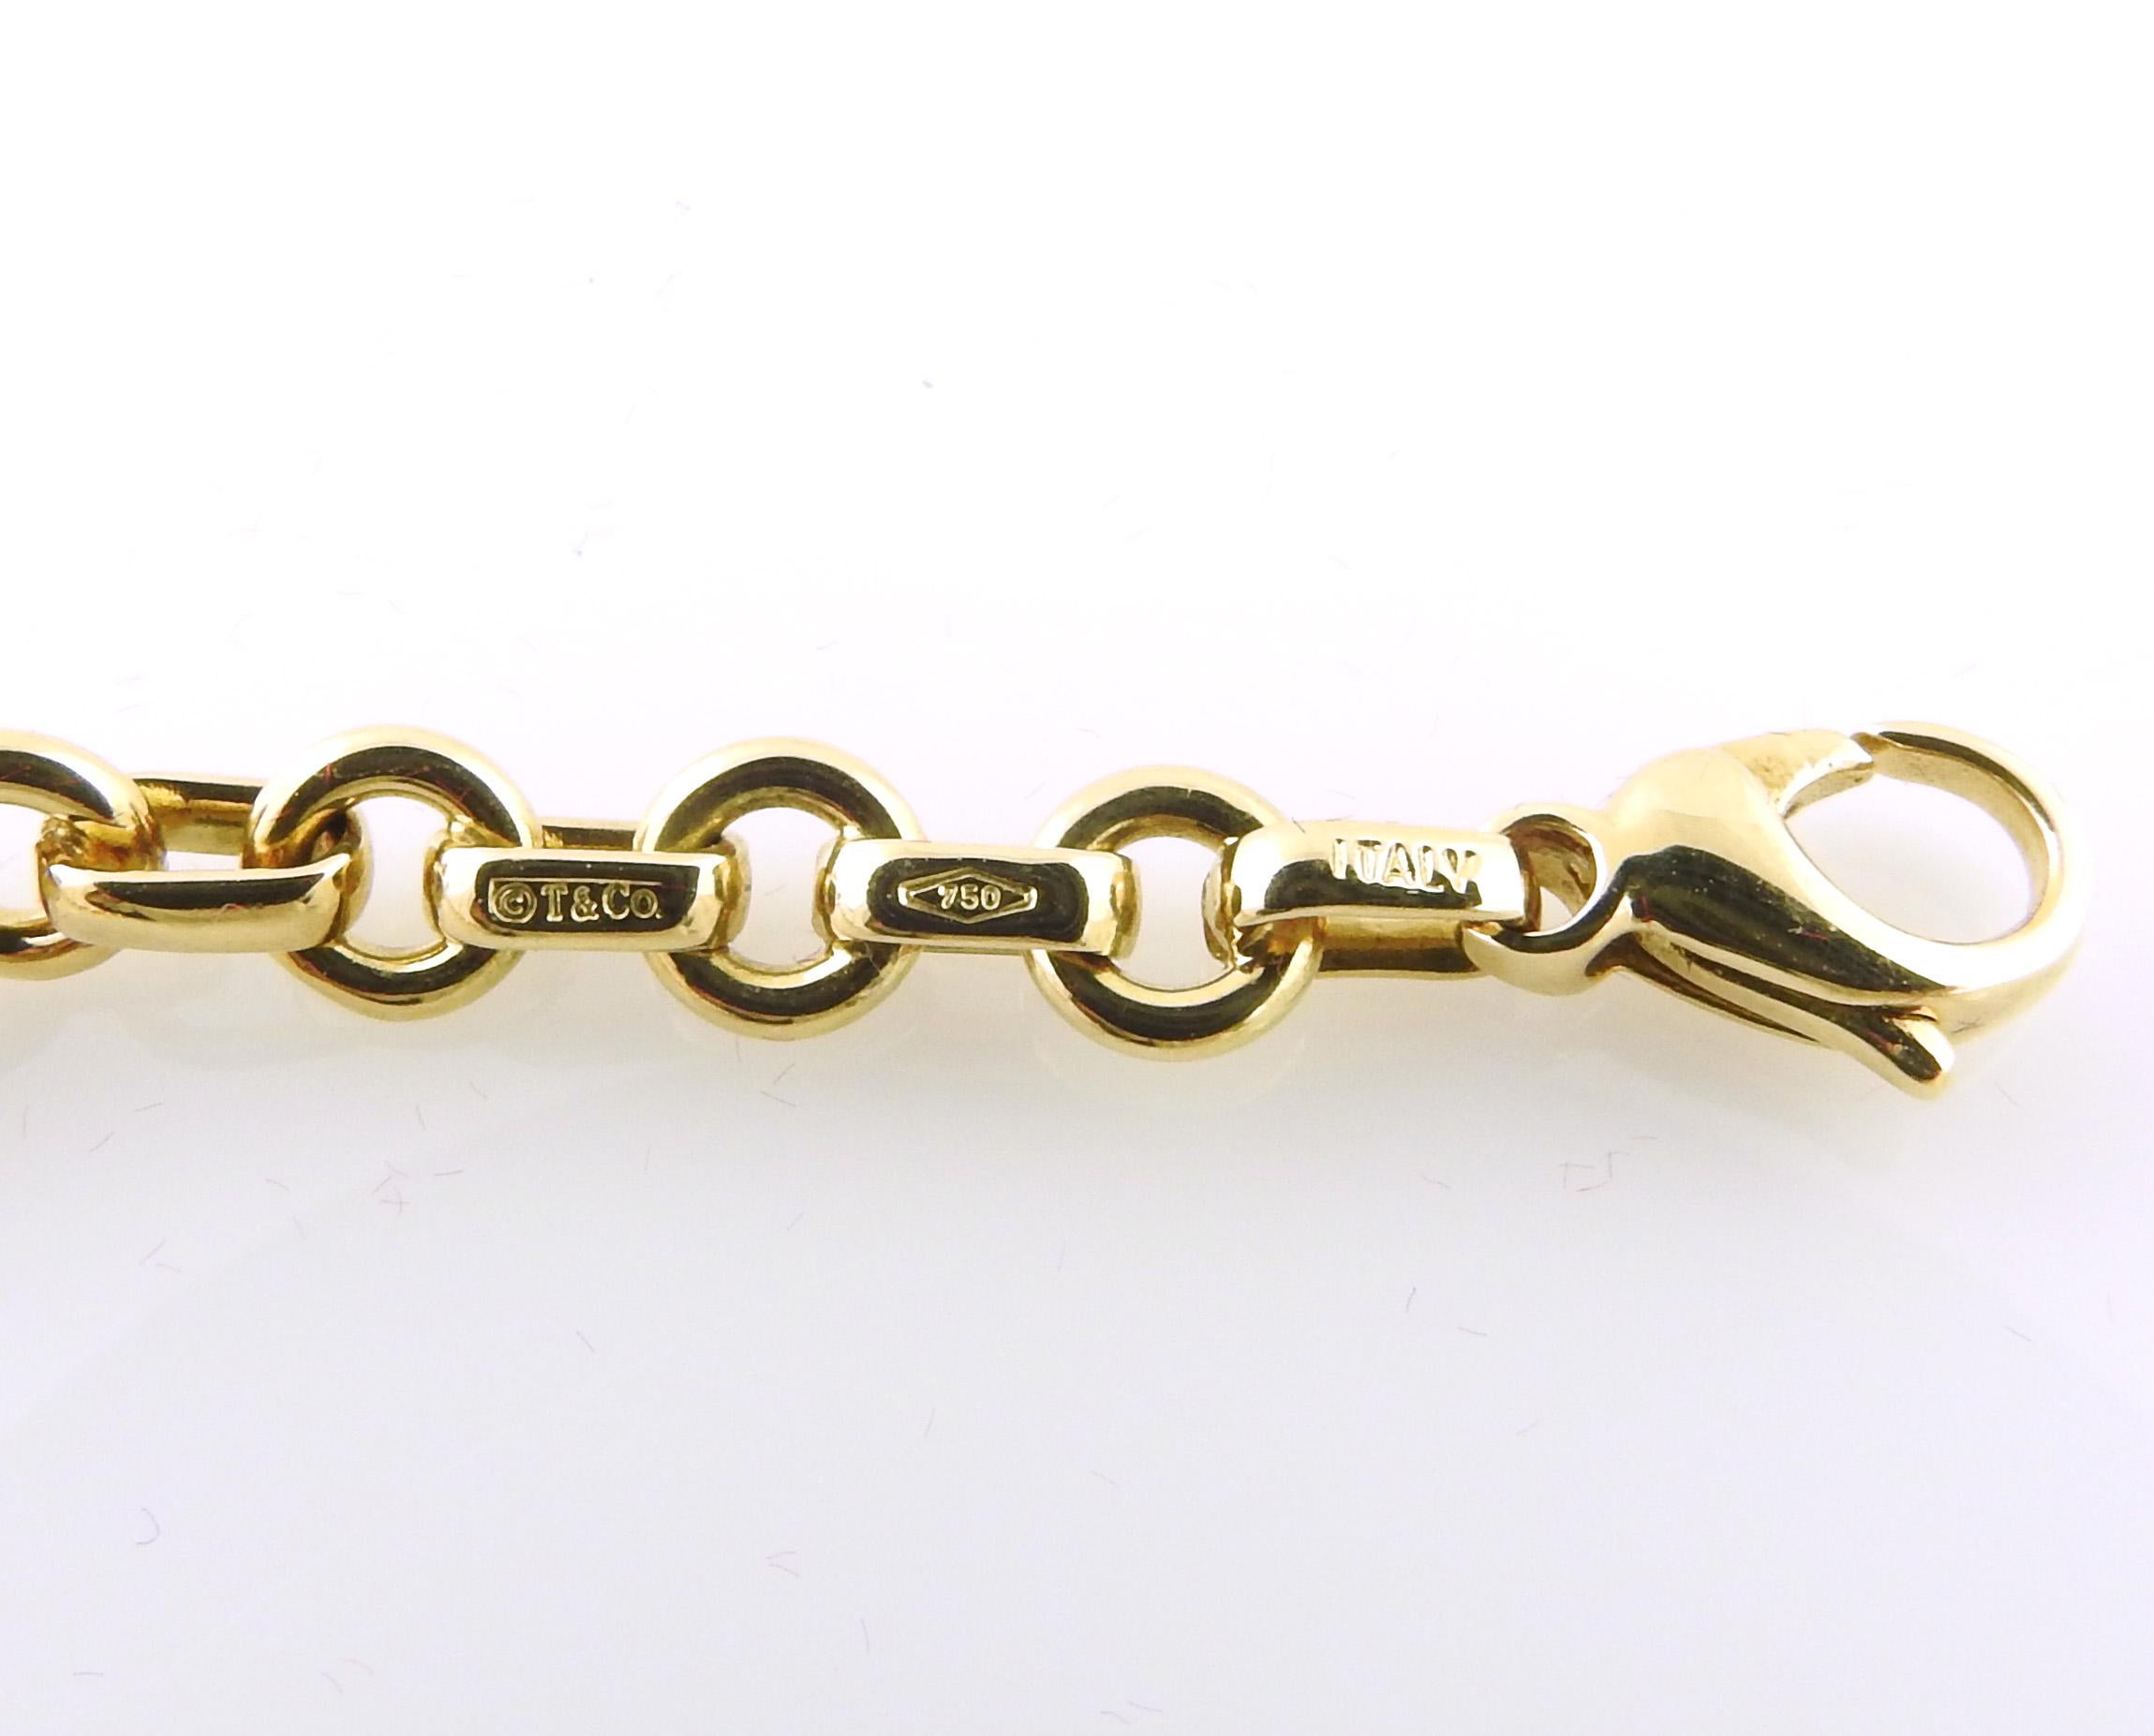 Tiffany & Co. 18K Yellow Gold Oval and Circle Link Charm Bracelet 7